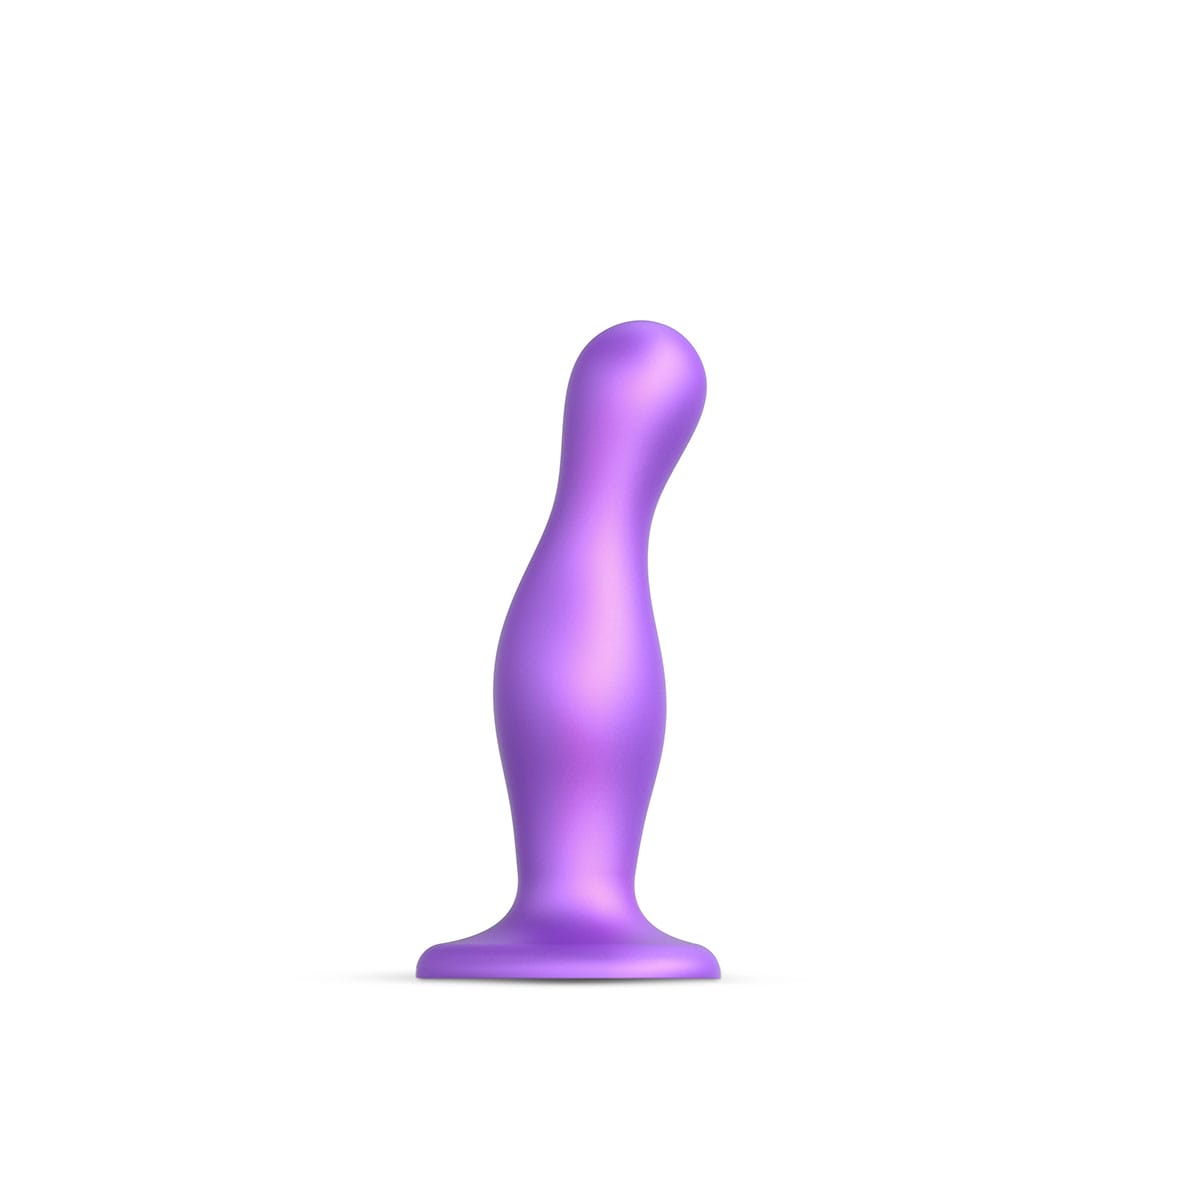 Buy Strap On Me Curvy Plug Dil Metallic Purple   Large  long and 1.85 thick dildo made by Strap-On-Me.